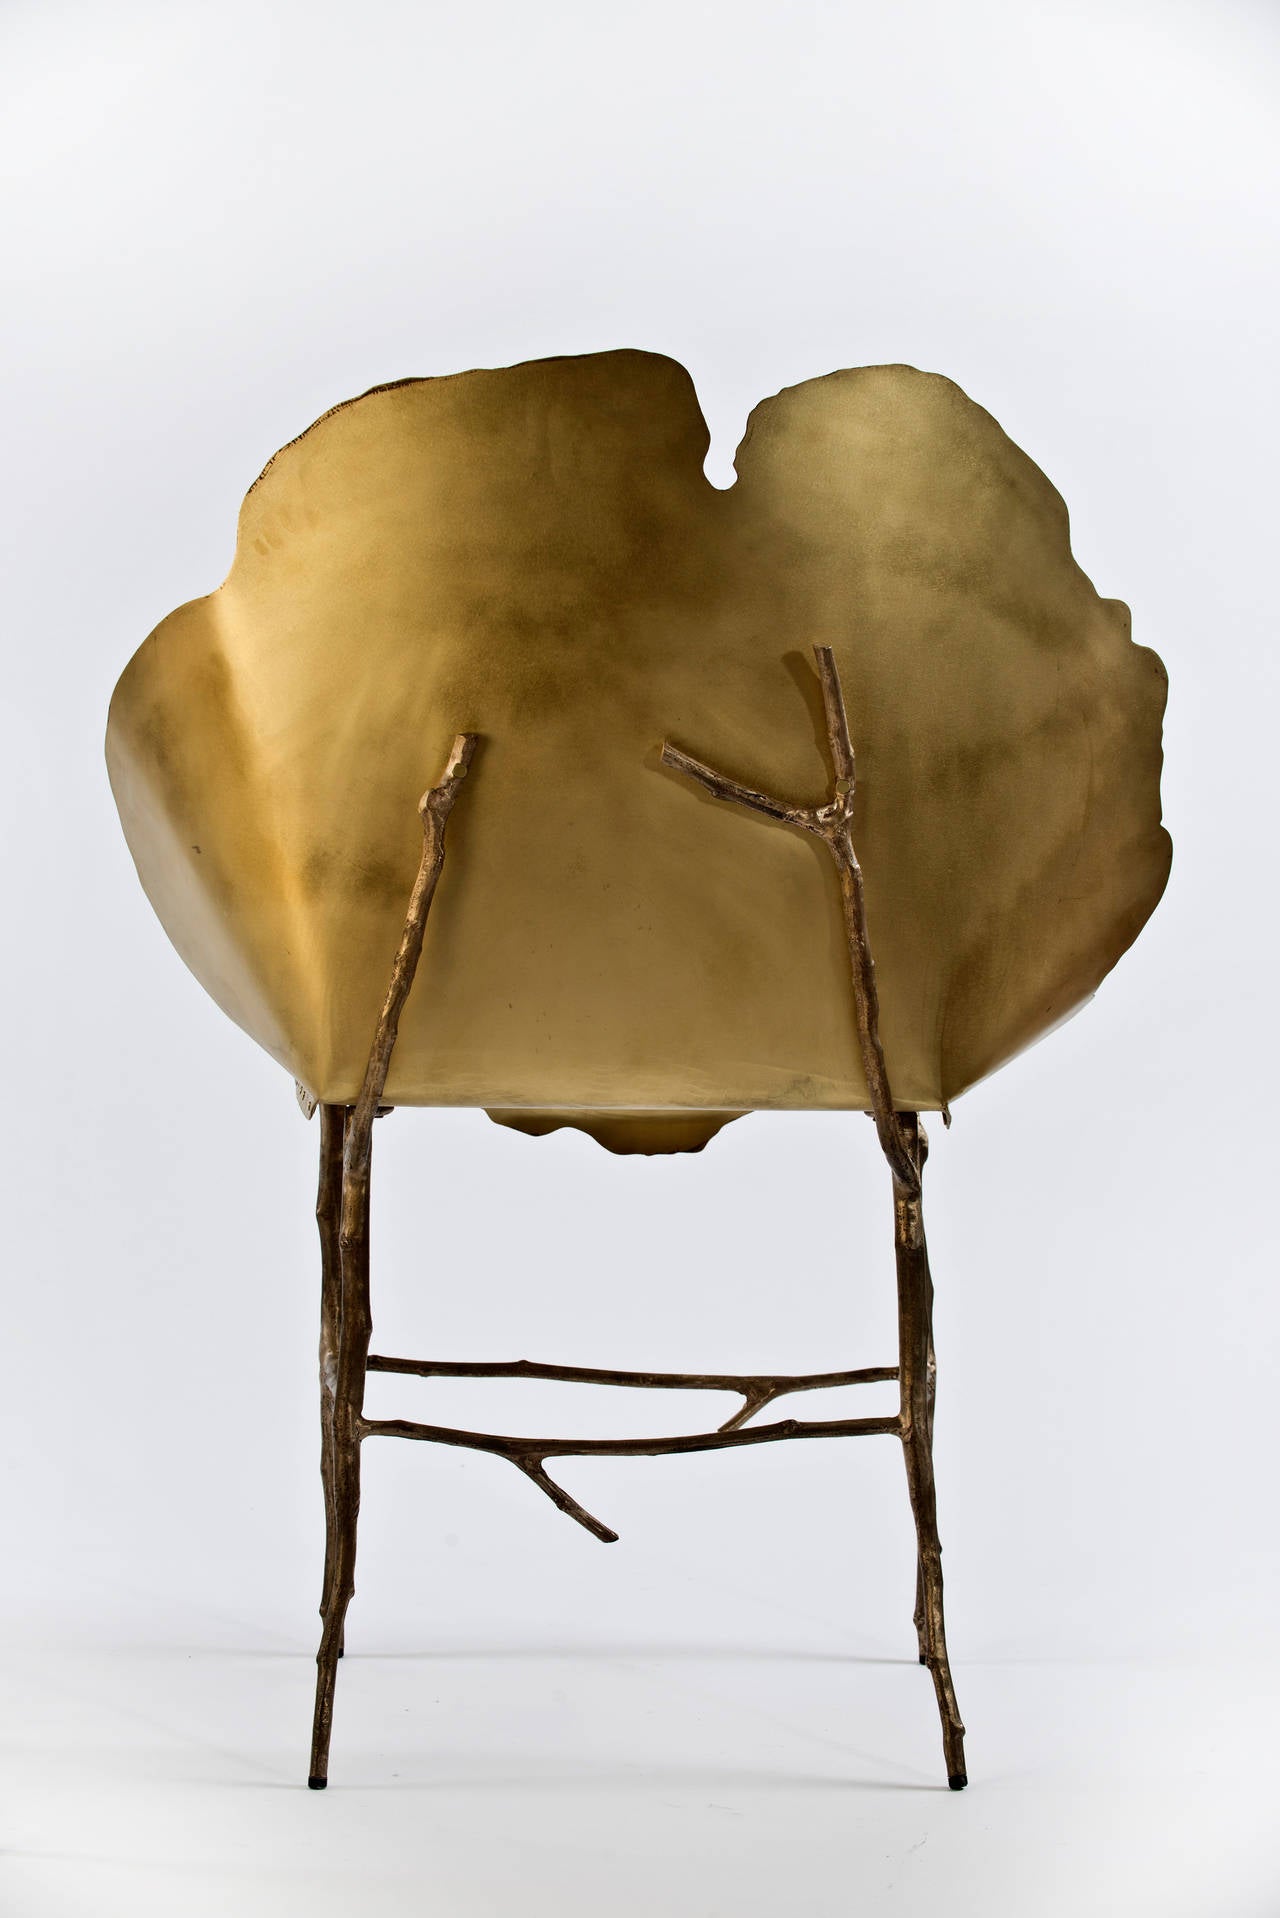 These acid-etched brass and cast bronze chairs are a special edition of 12 made by Israeli designer Sharon Sides.